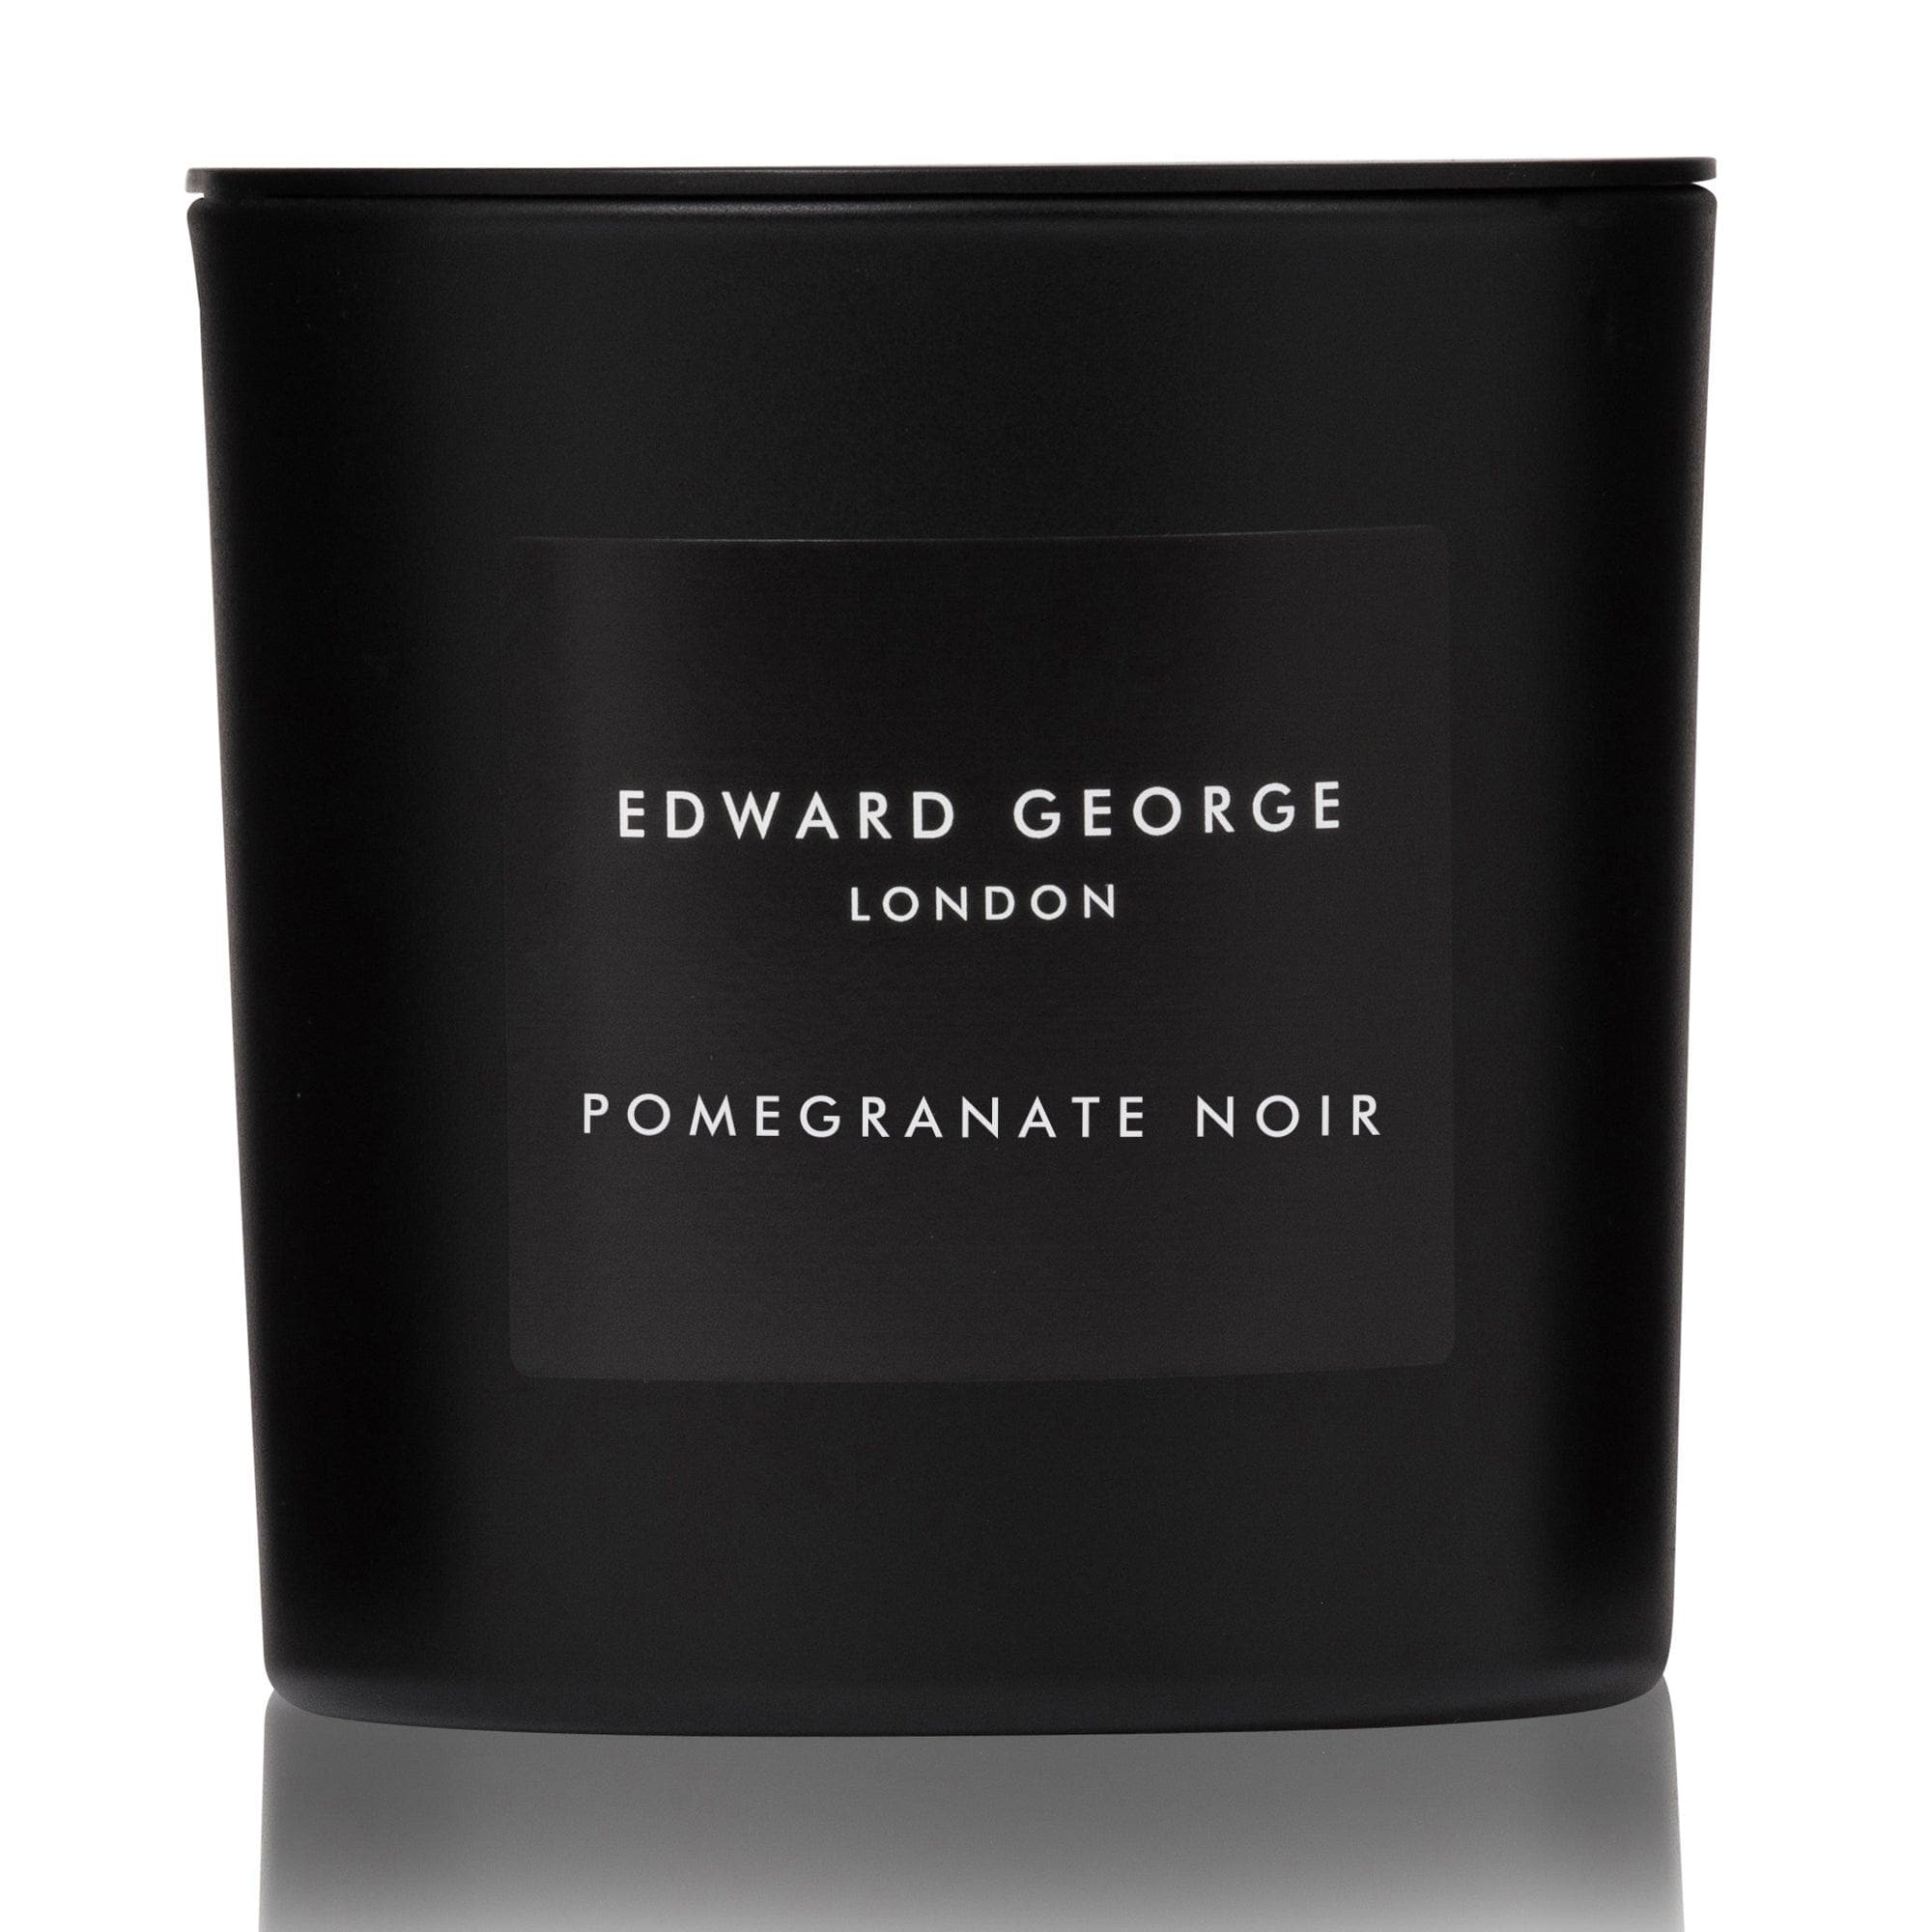 pomegranate noir candles home fragrance decor room living edward george london luxury gift ritual scent set lid mineral best black wax scented candle women men large